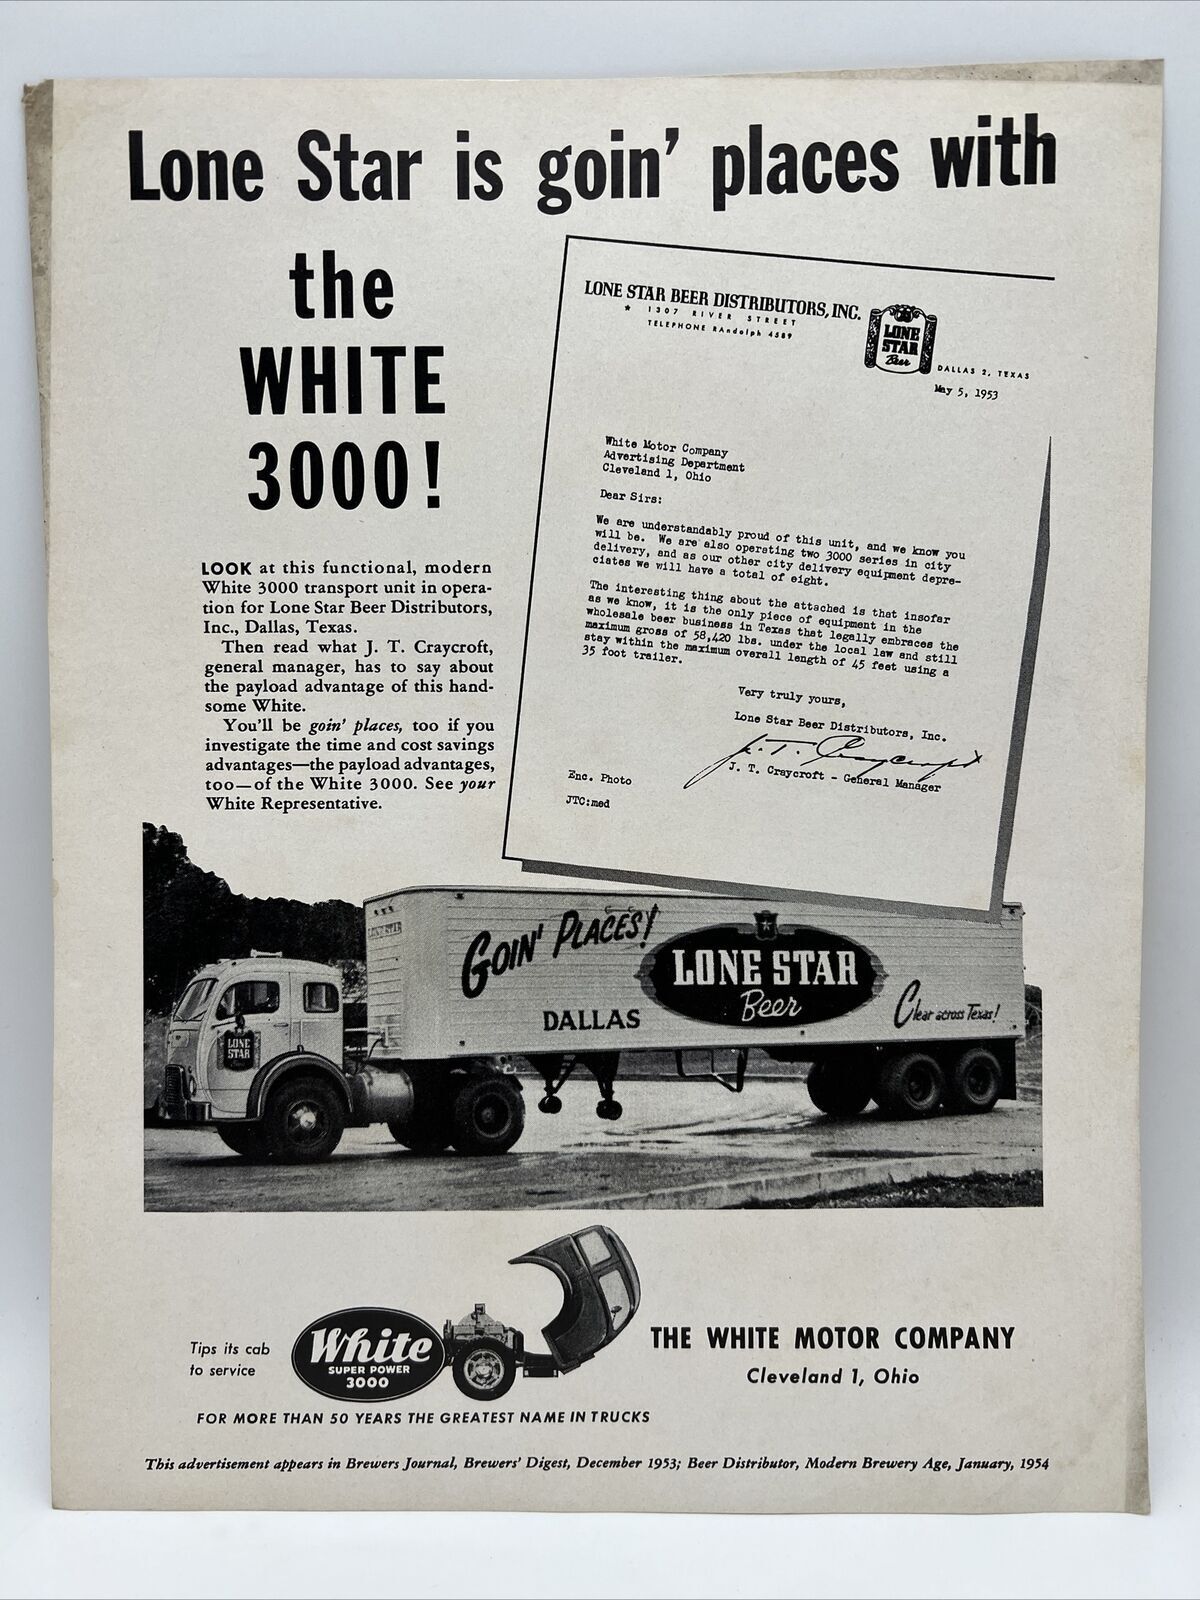 1954 LONE STAR BEER GOING PLACES WITH WHITE 3000 TRUCKS Modern Brewery Age Ad